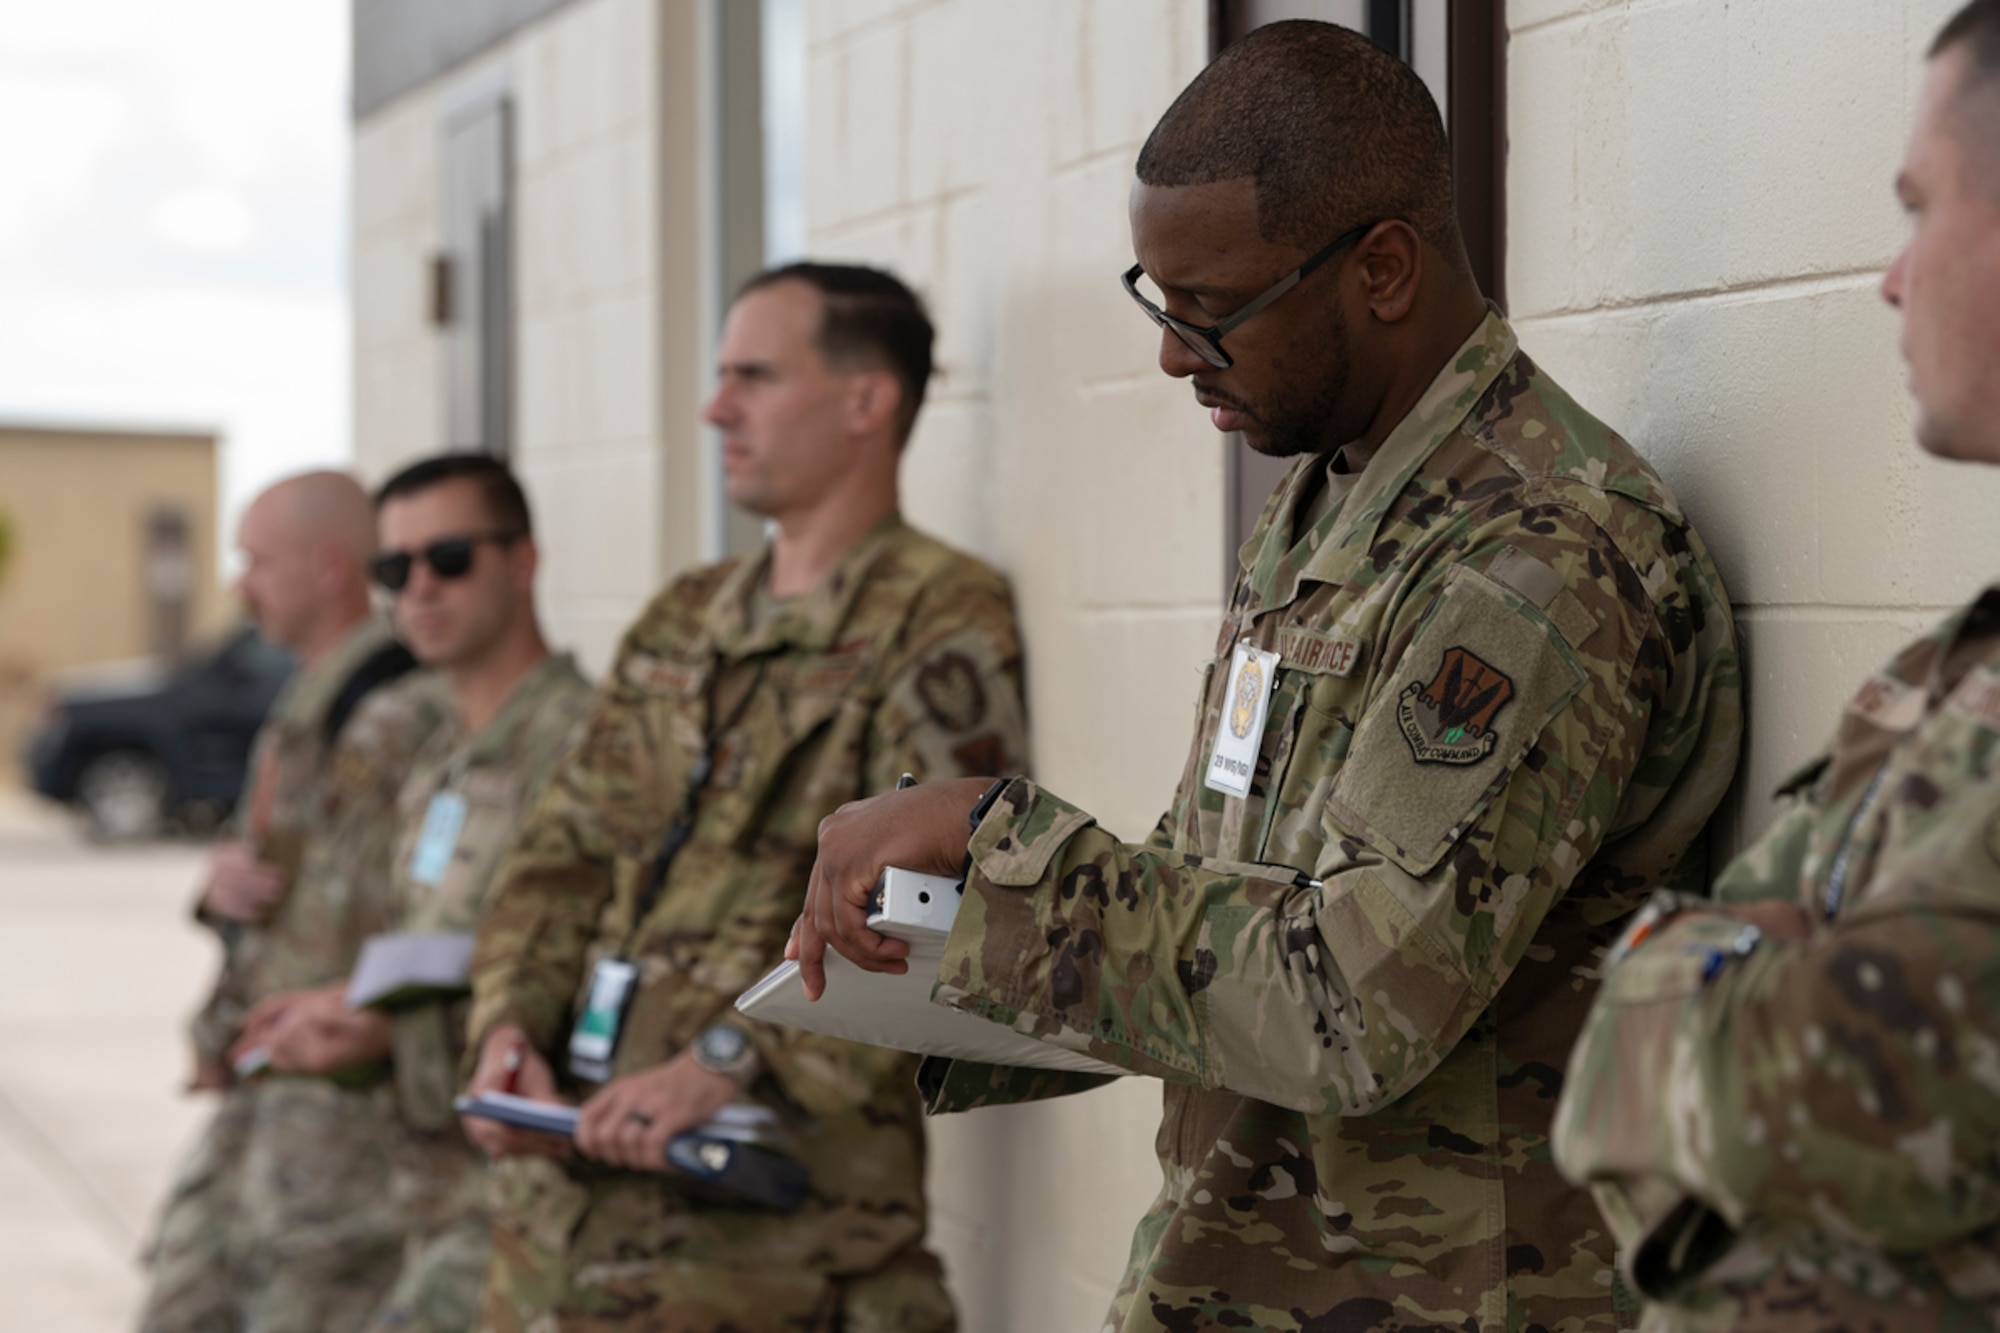 U.S. Air Force Tech. Sgt. Claudel Summers, 23rd Wing Inspector General inspector, takes notes during Mosaic Tiger 24-1 at Avon Park Air Force Range, Florida, Nov. 13, 2023. A team of inspectors are tasked with evaluating Airmen and their efficiency of operations during the exercise to determine their overall readiness. (U.S. Air Force photo by Senior Airman Rachel Coates)